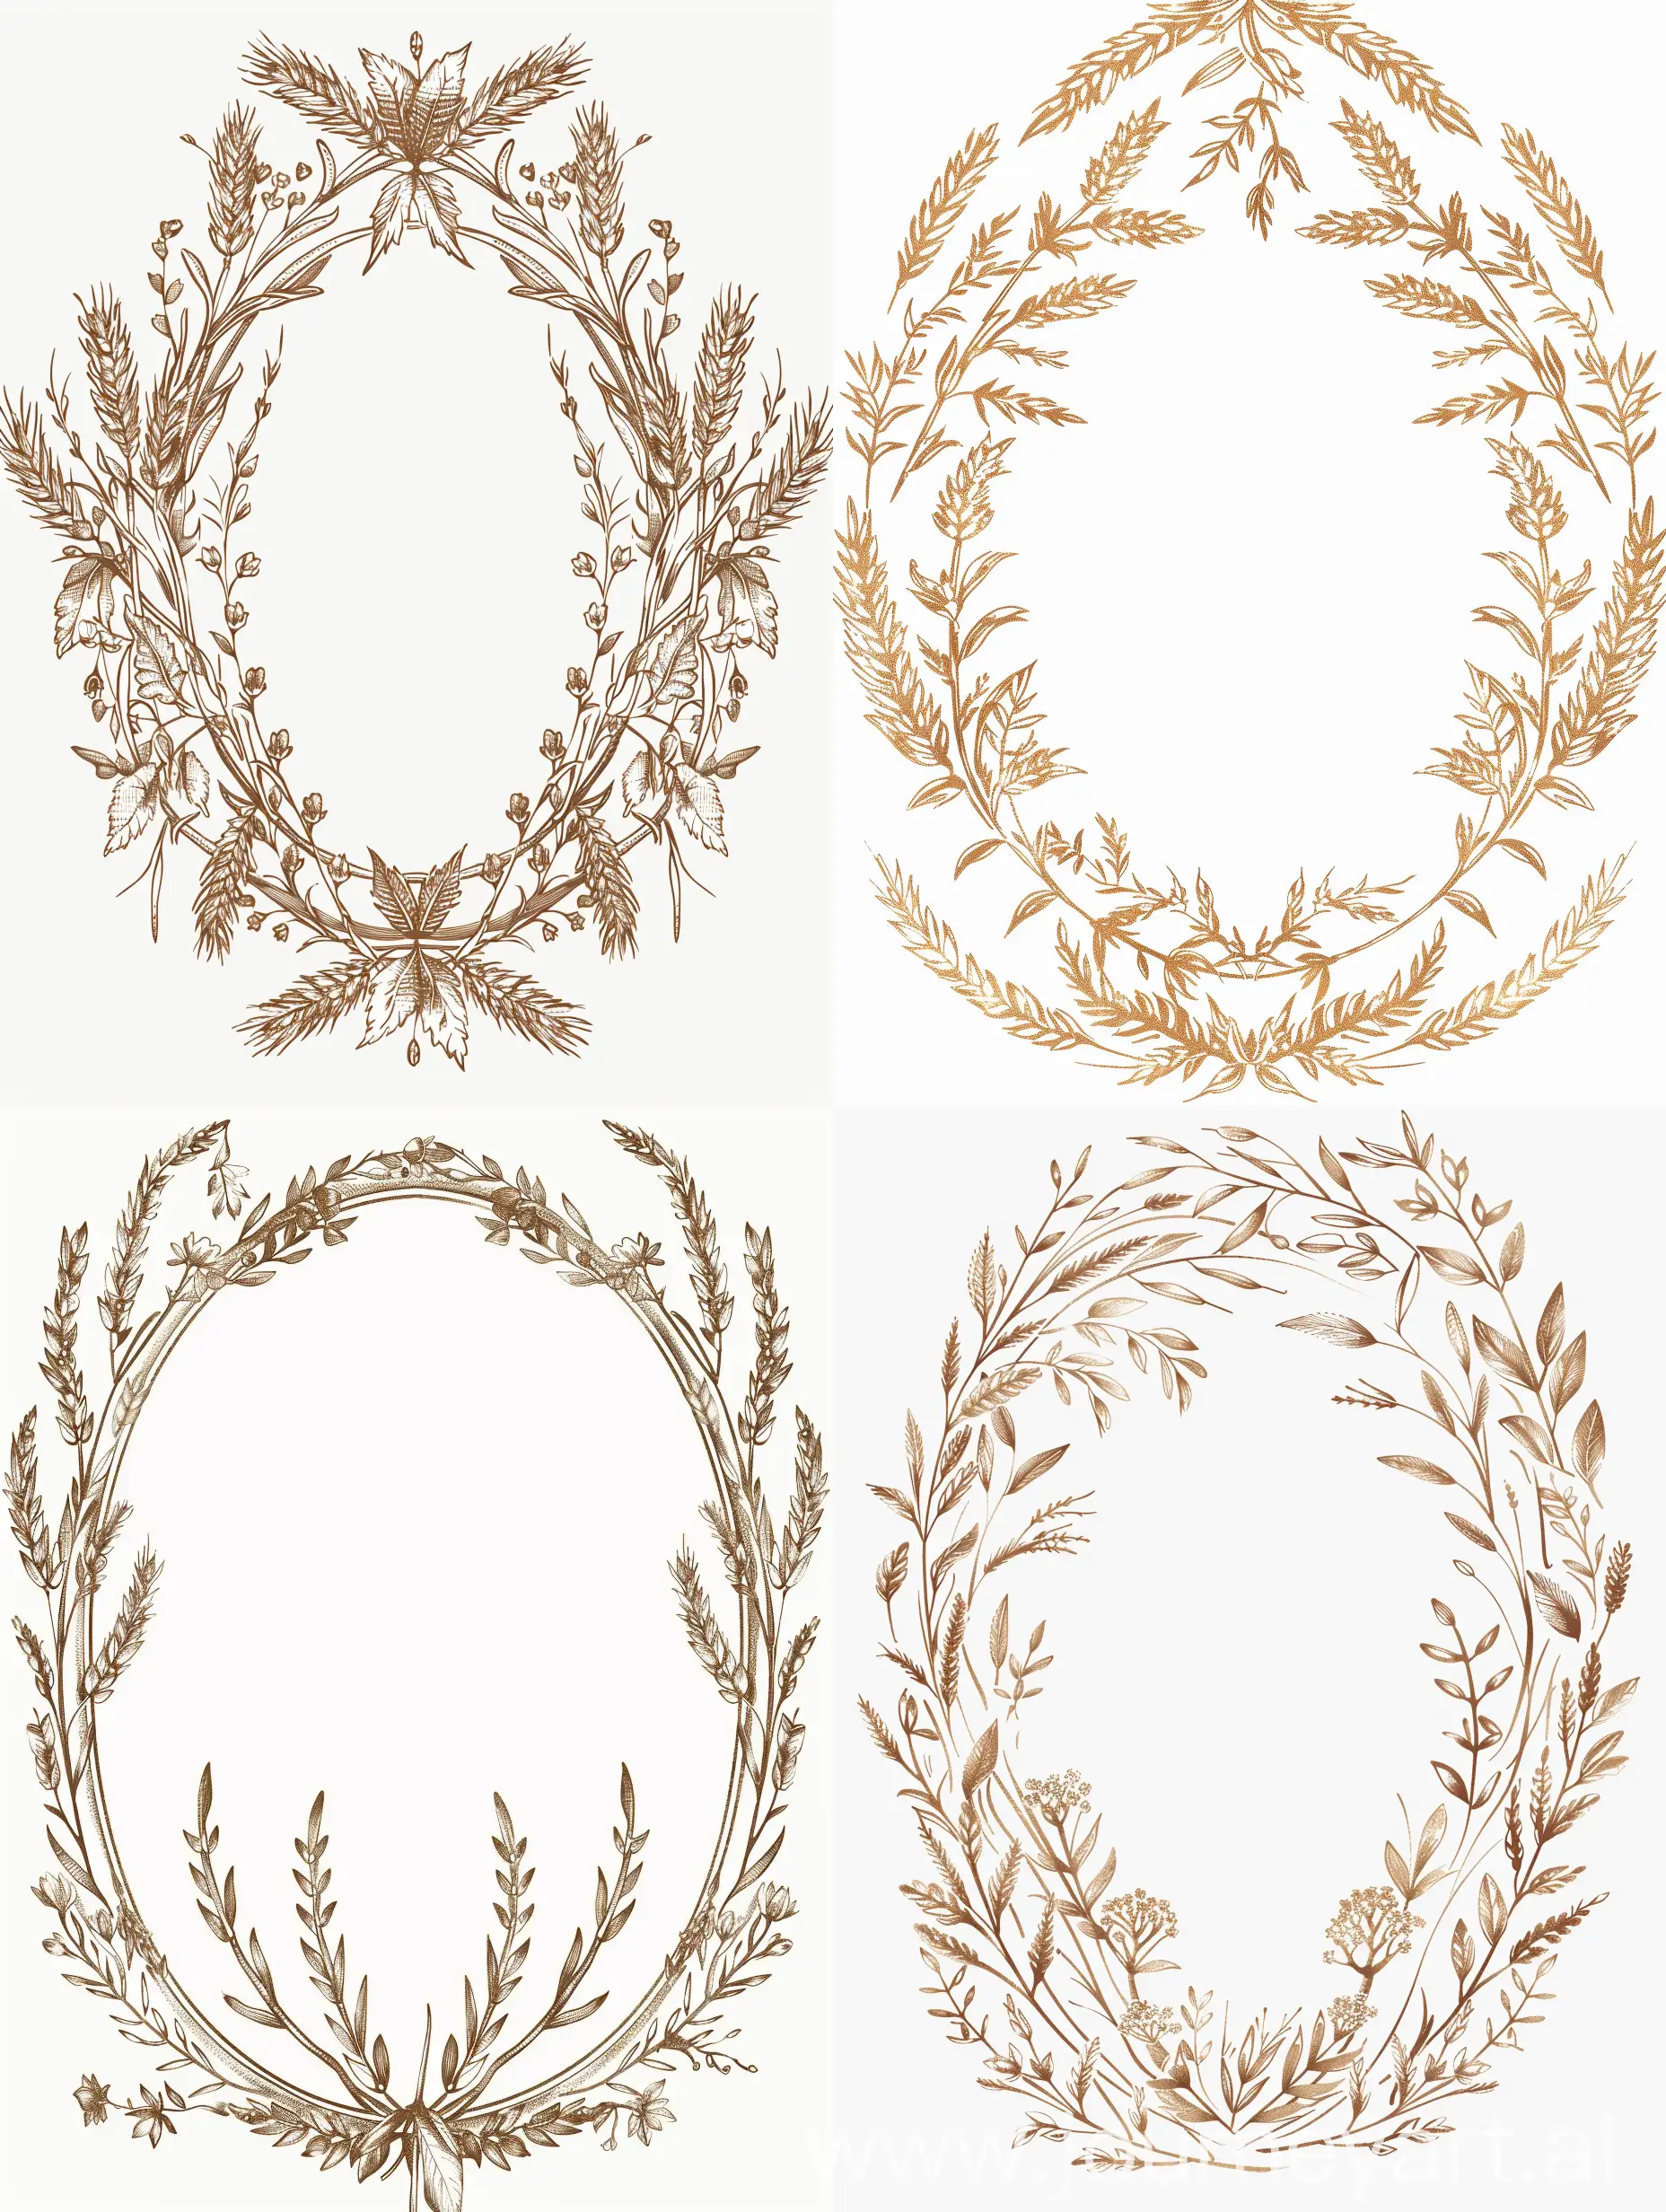 Natural-Elements-Oval-Frame-with-Wheat-Leaves-and-Spikelets